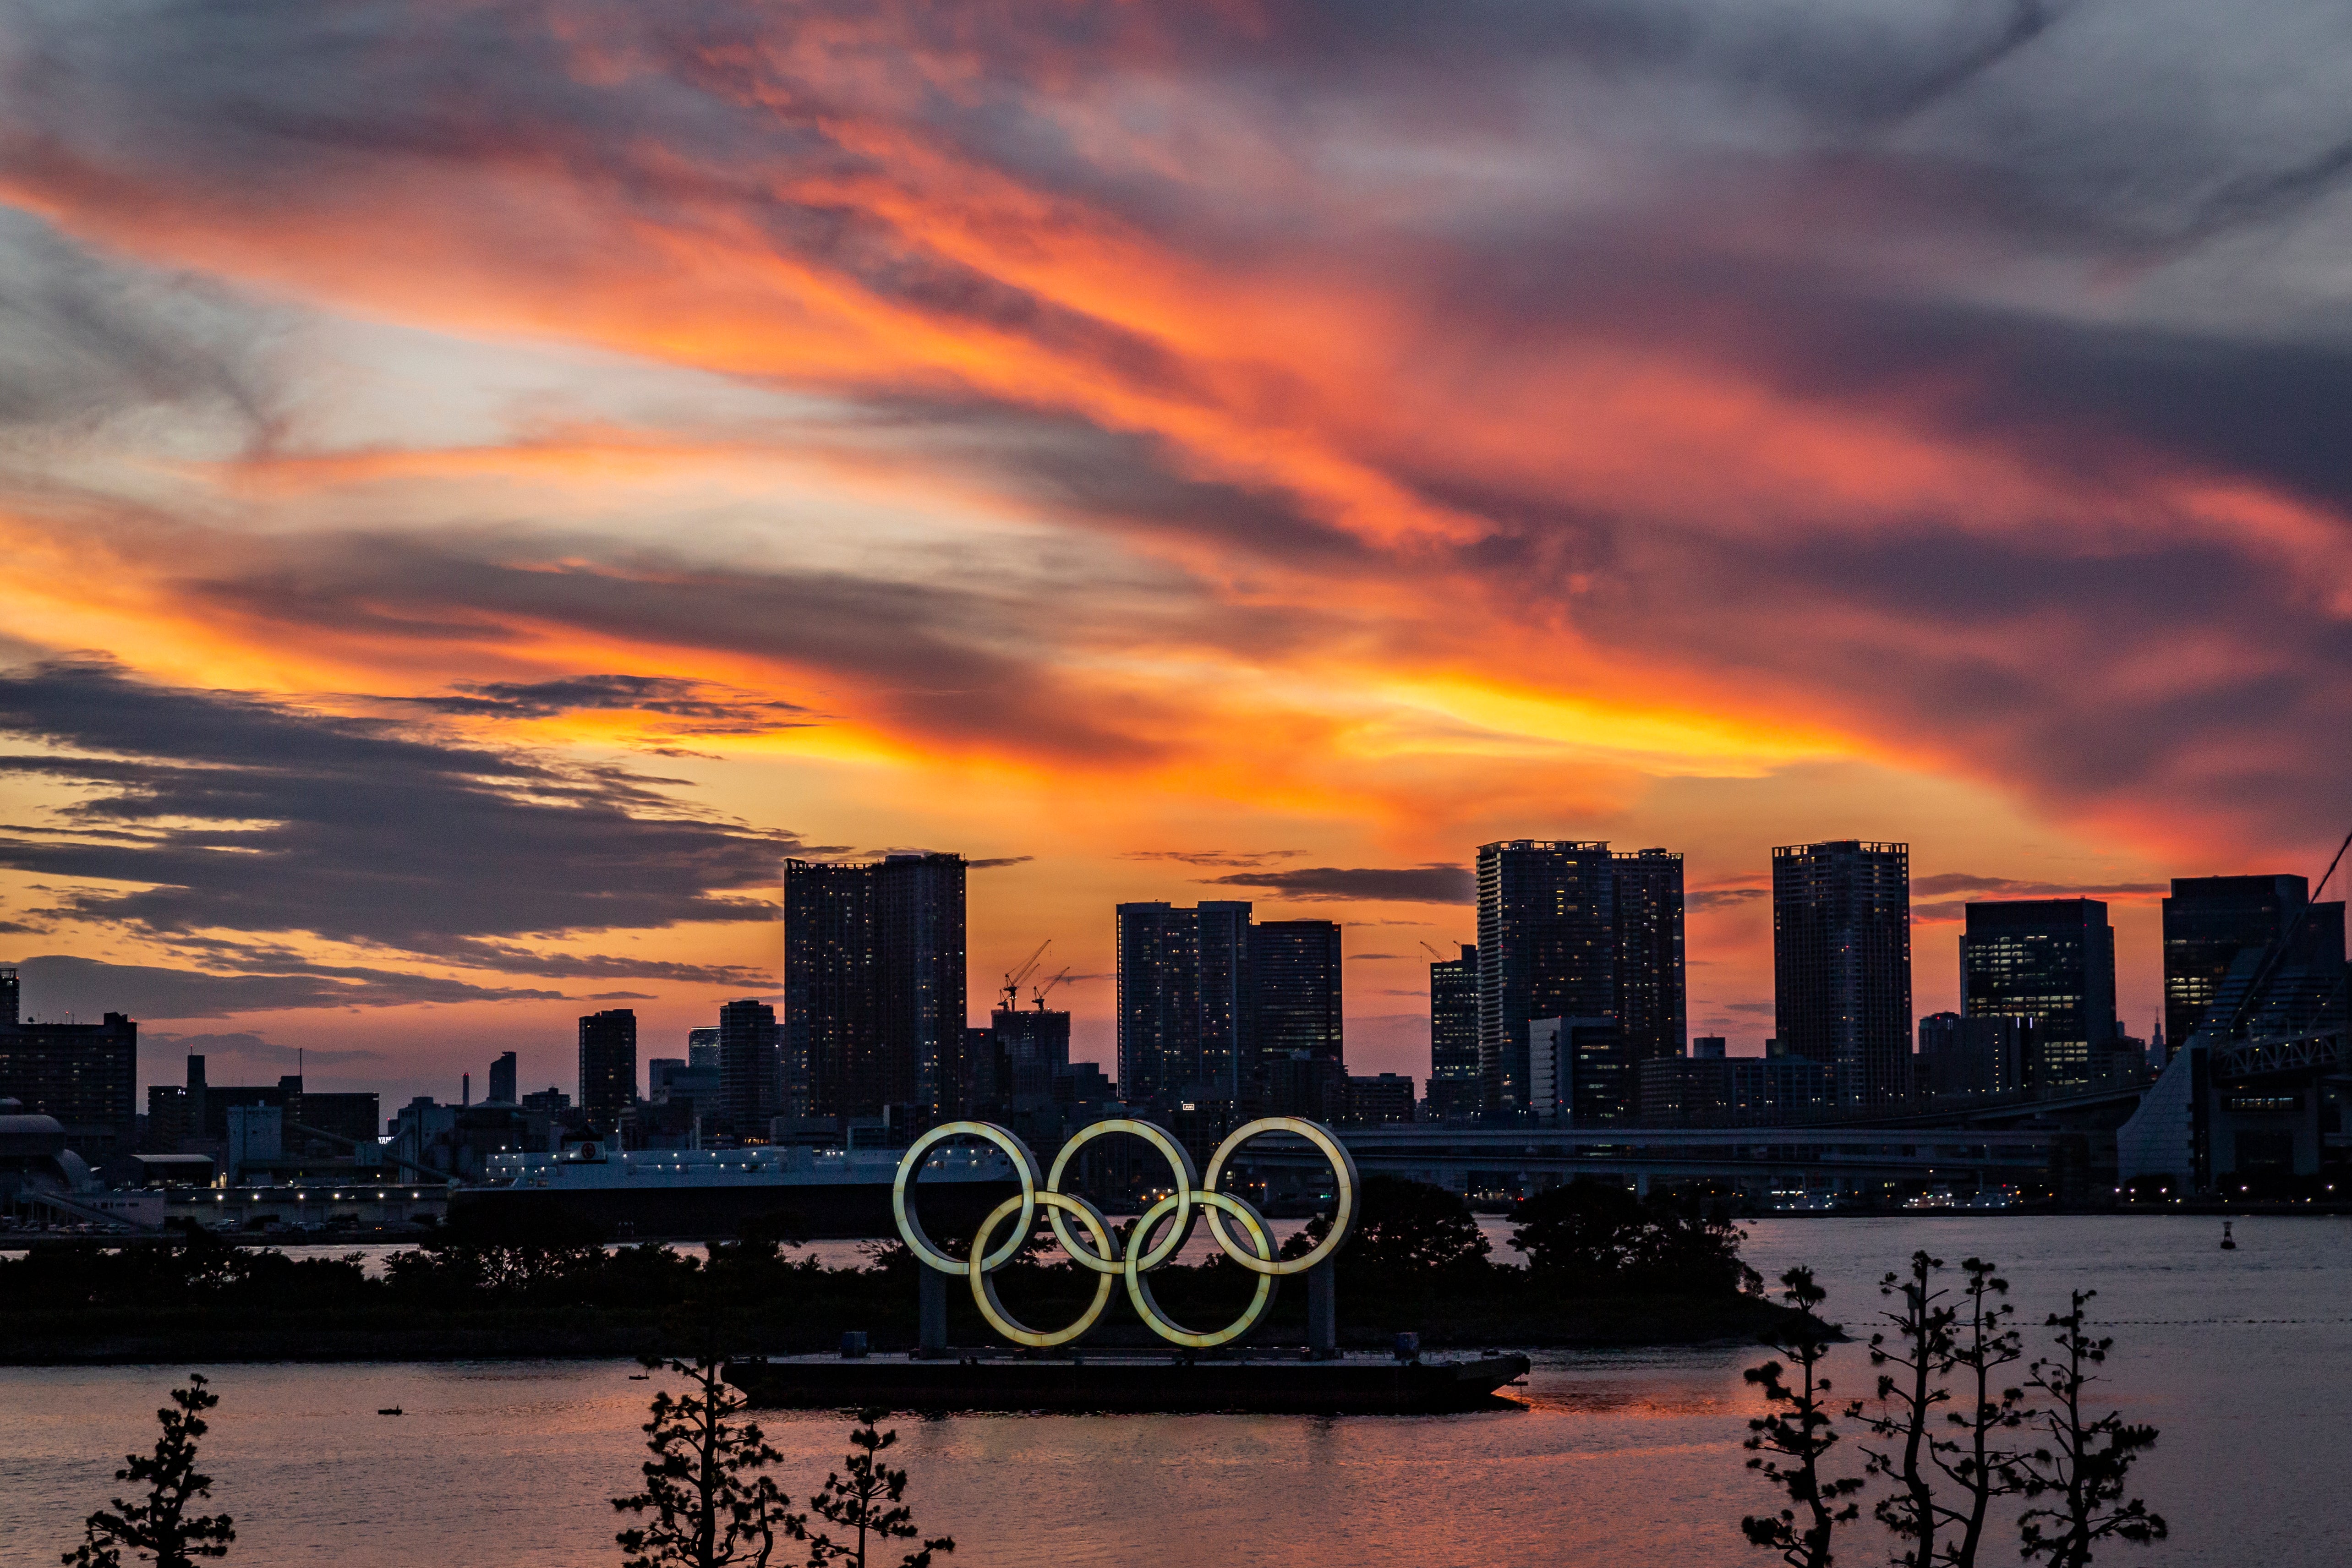 The Olympic rings at sunset in Tokyo